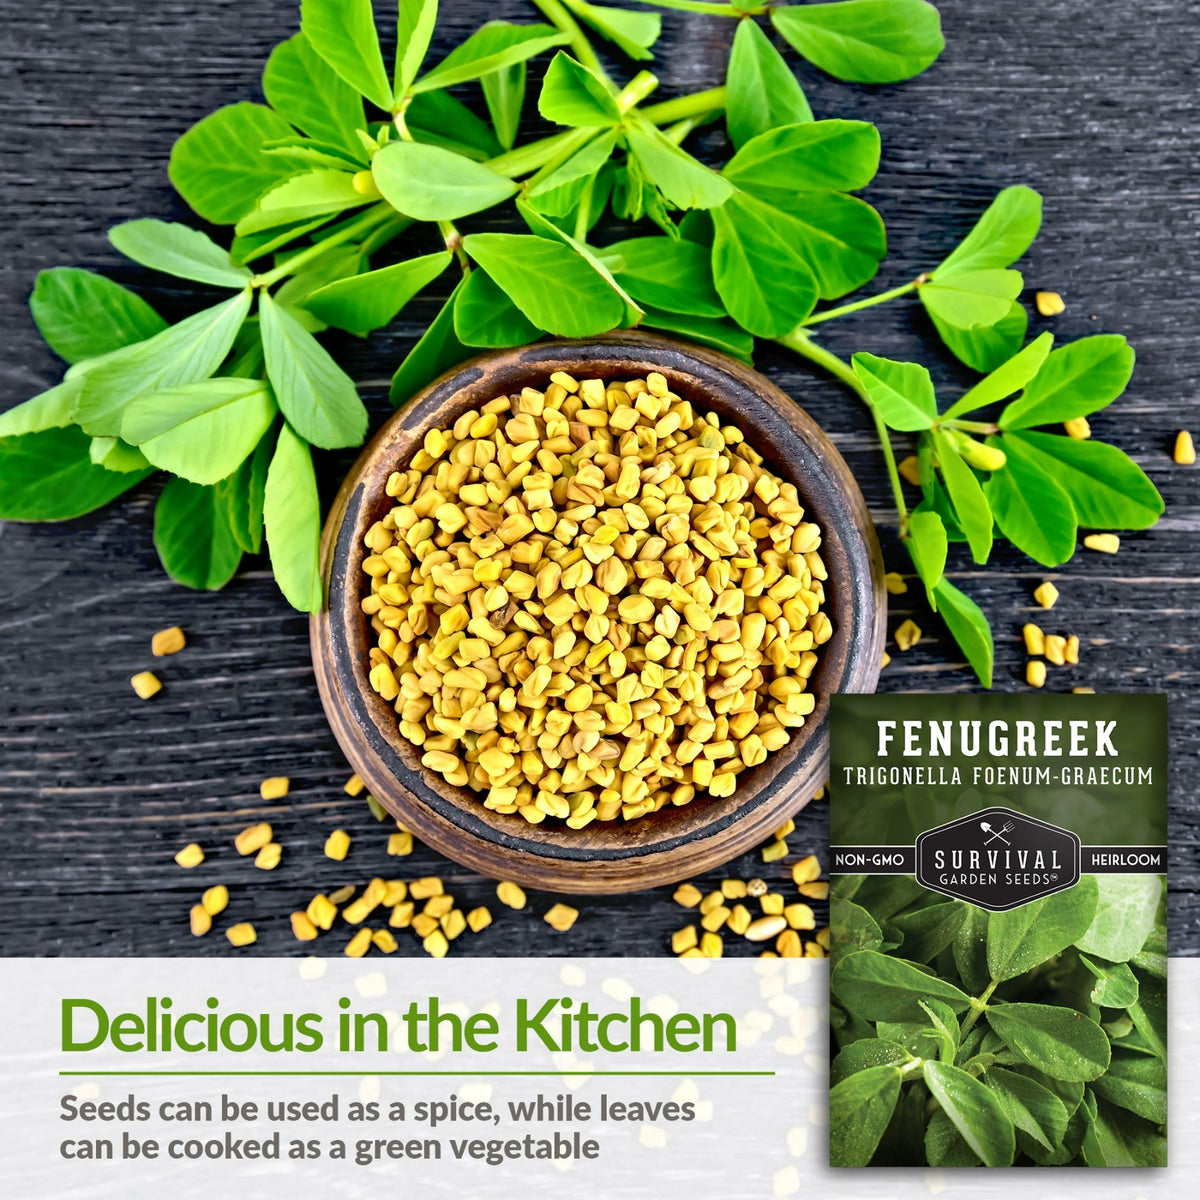 Fenugreek seeds can be used as a spice, while leaves can be cooked as a vegetable